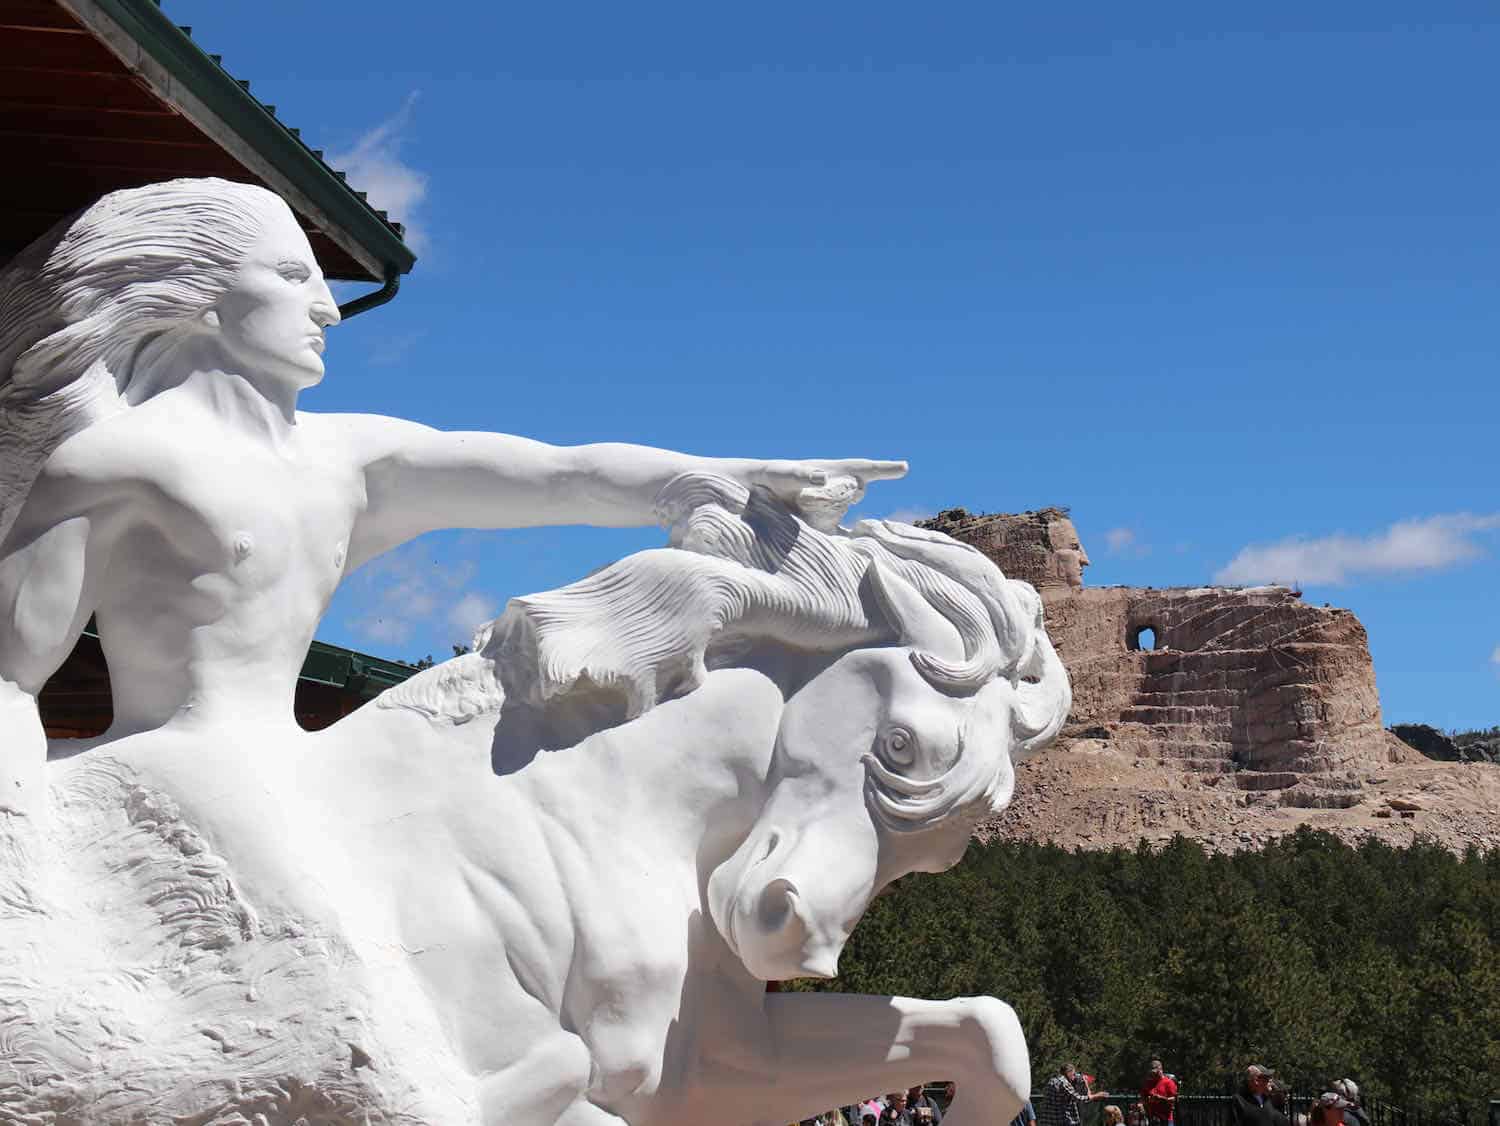 Crazy Horse and Mount Rushmore Memorials: How to Visit Two South Dakota Stone Monuments